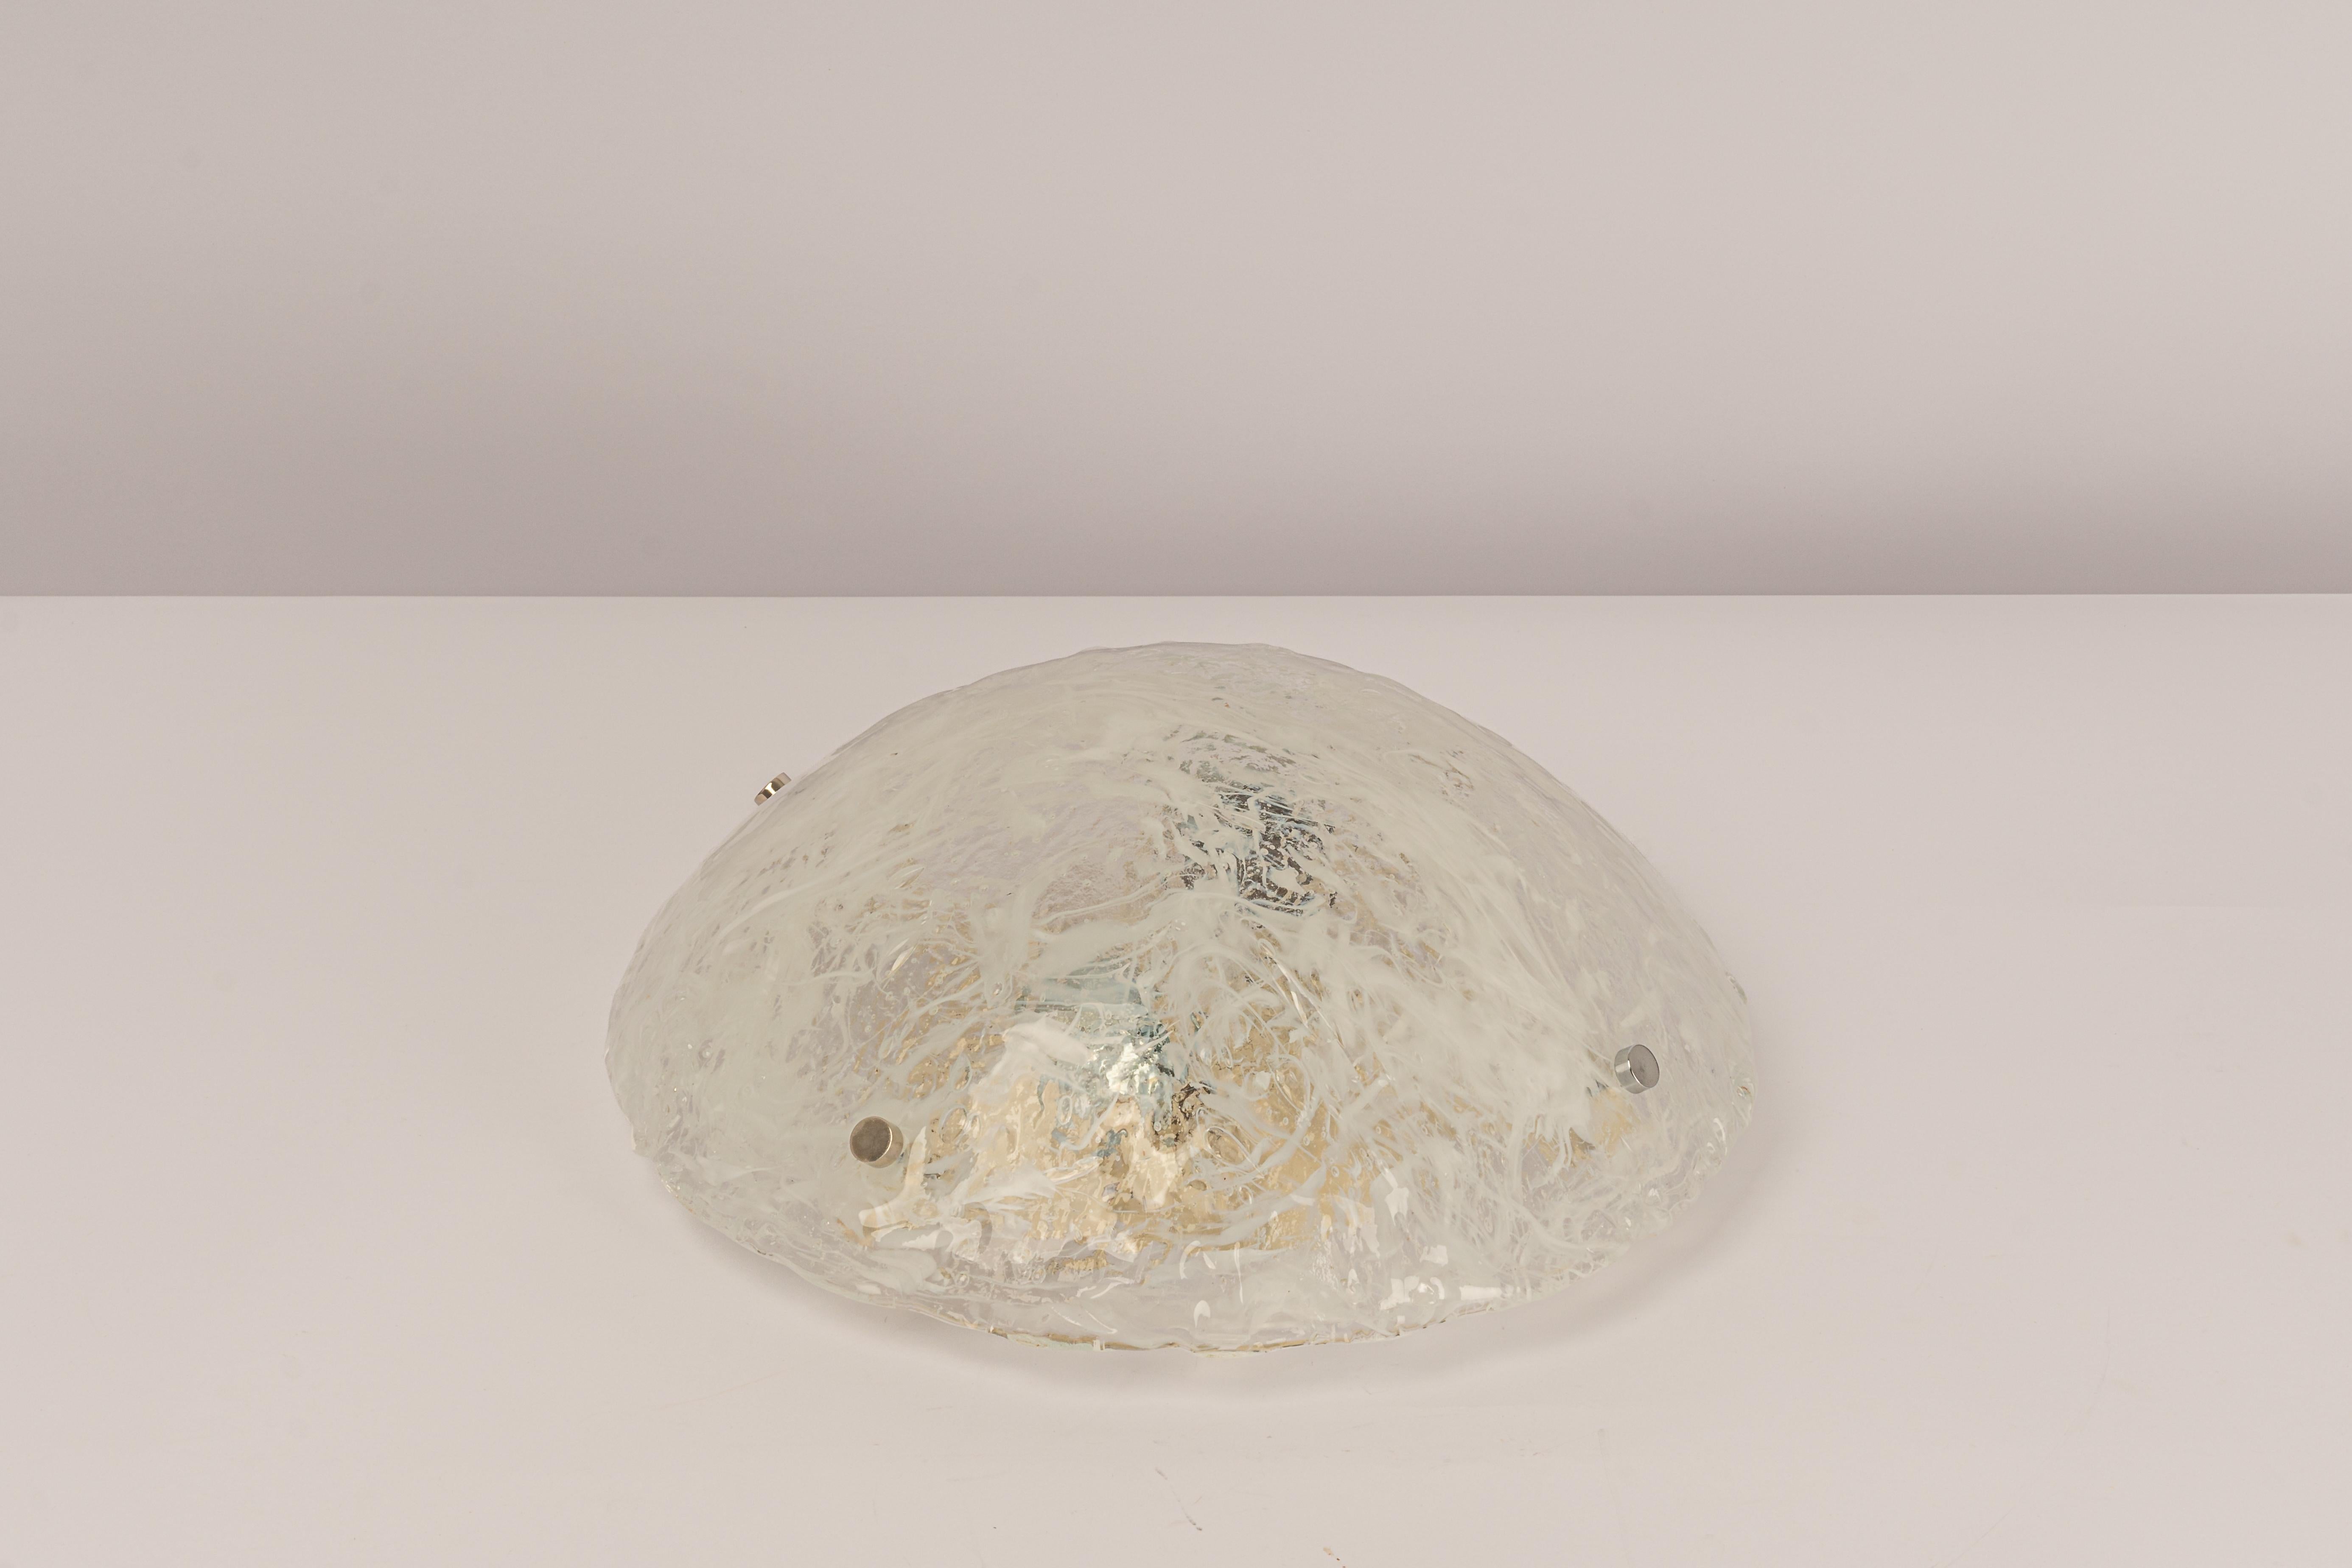 1 of 2 Large Venini Ceiling Lights Attributed to Carlo Scarpa for Venini, 1950s For Sale 3